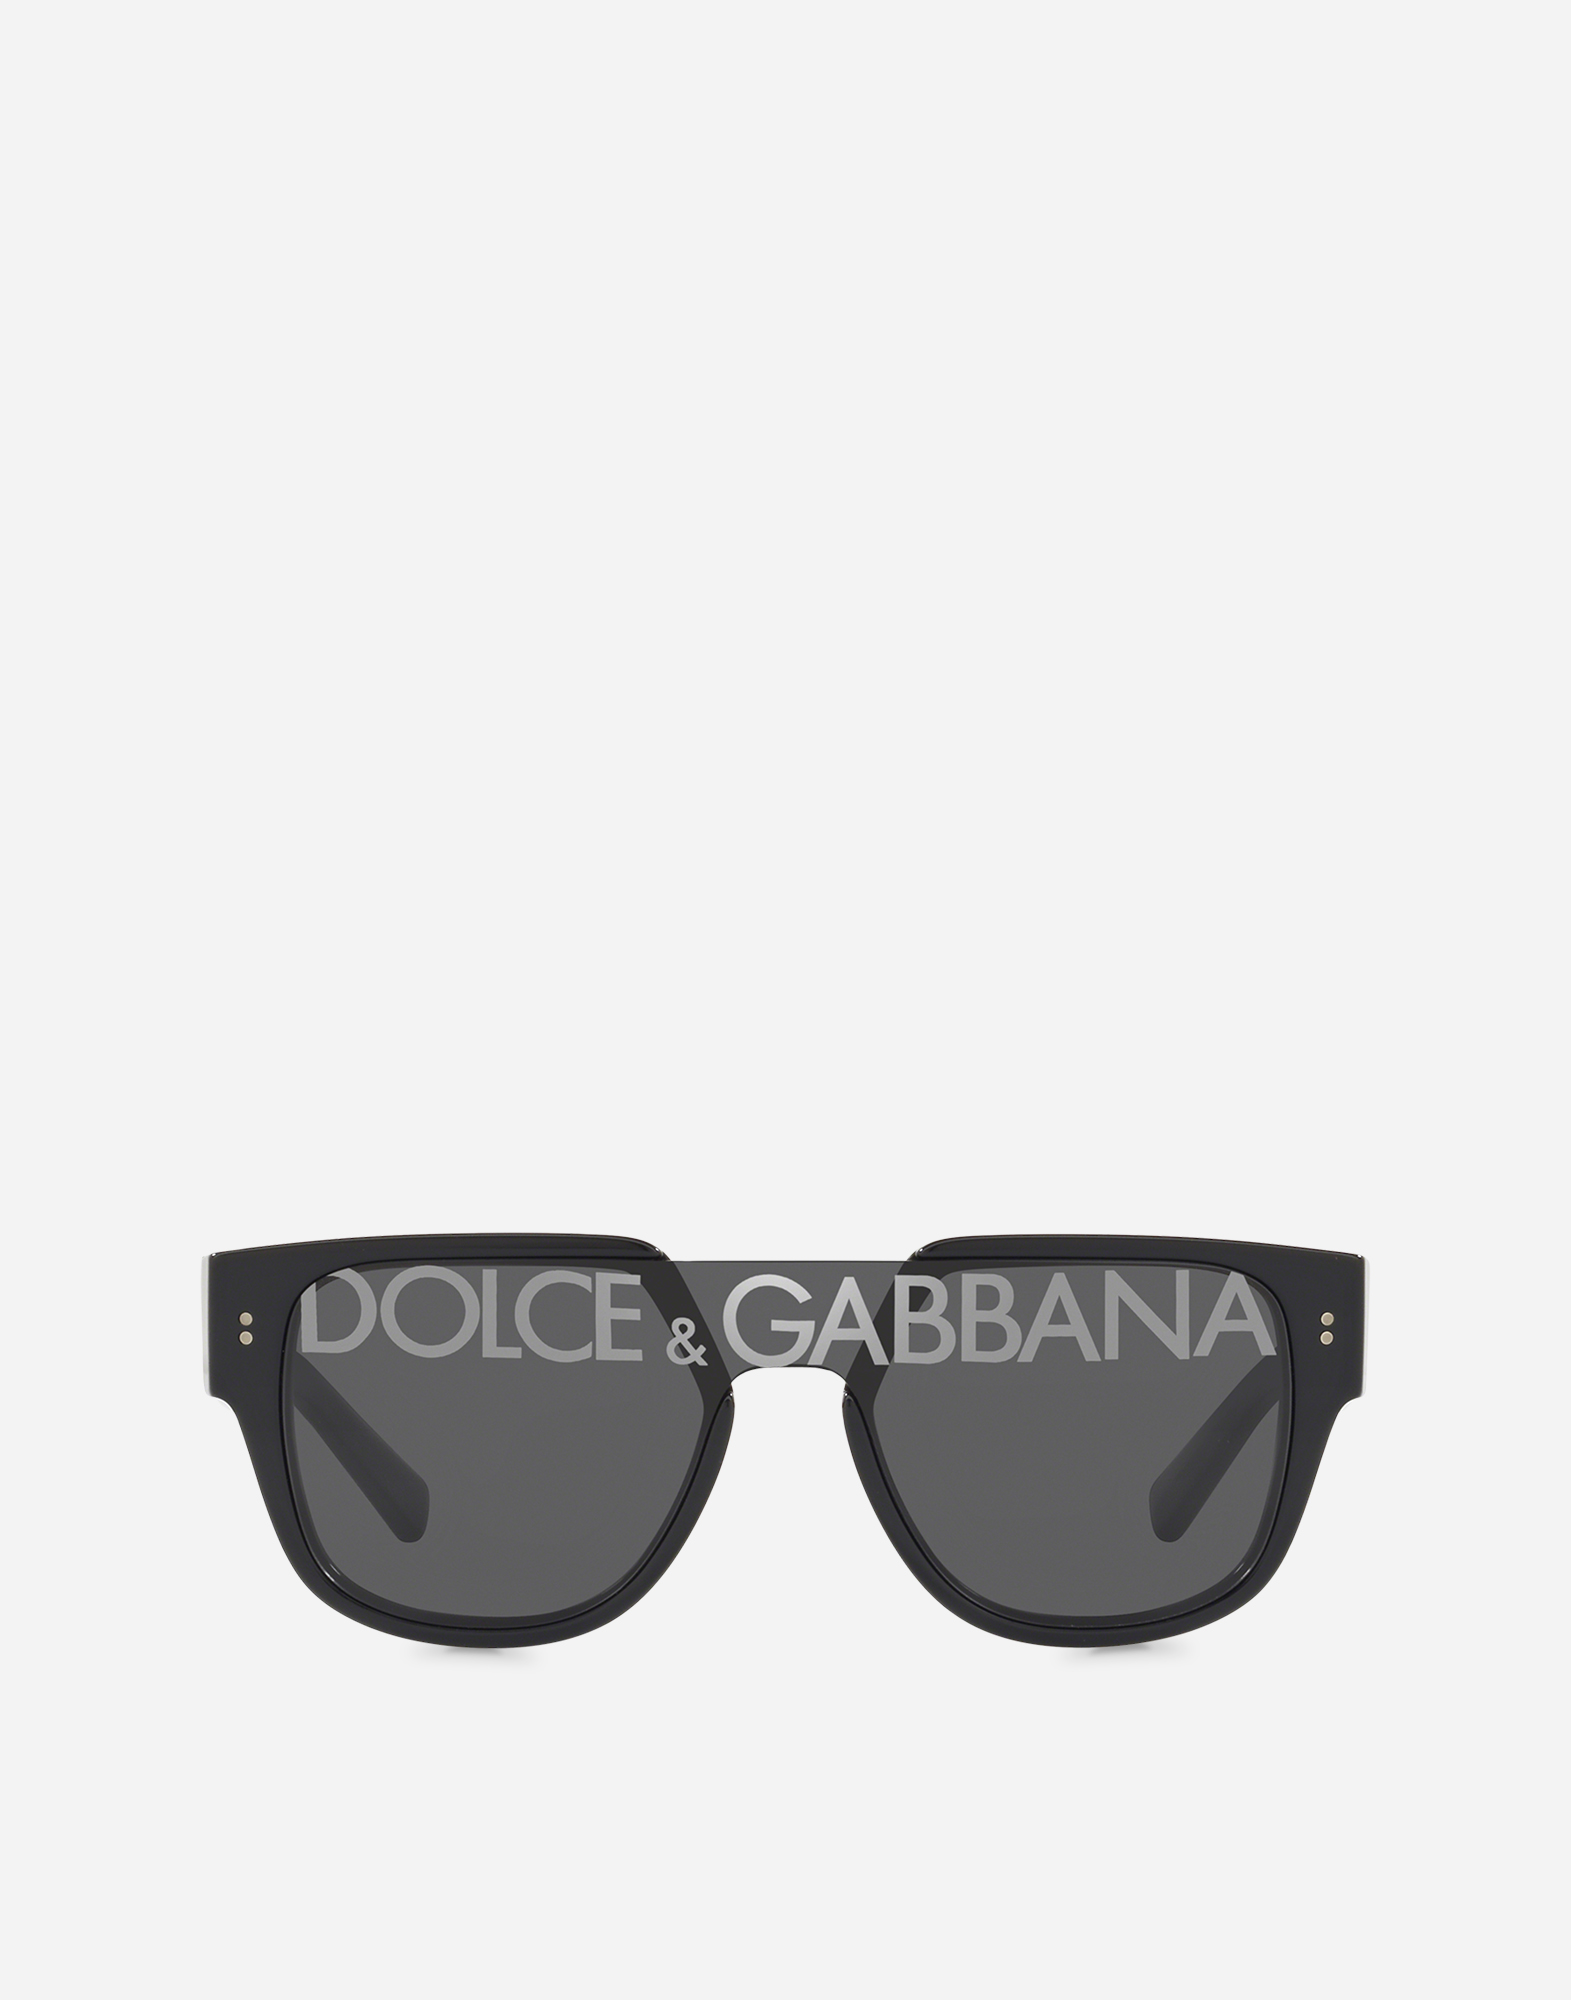 dolce and gabbana sunglasses new collection